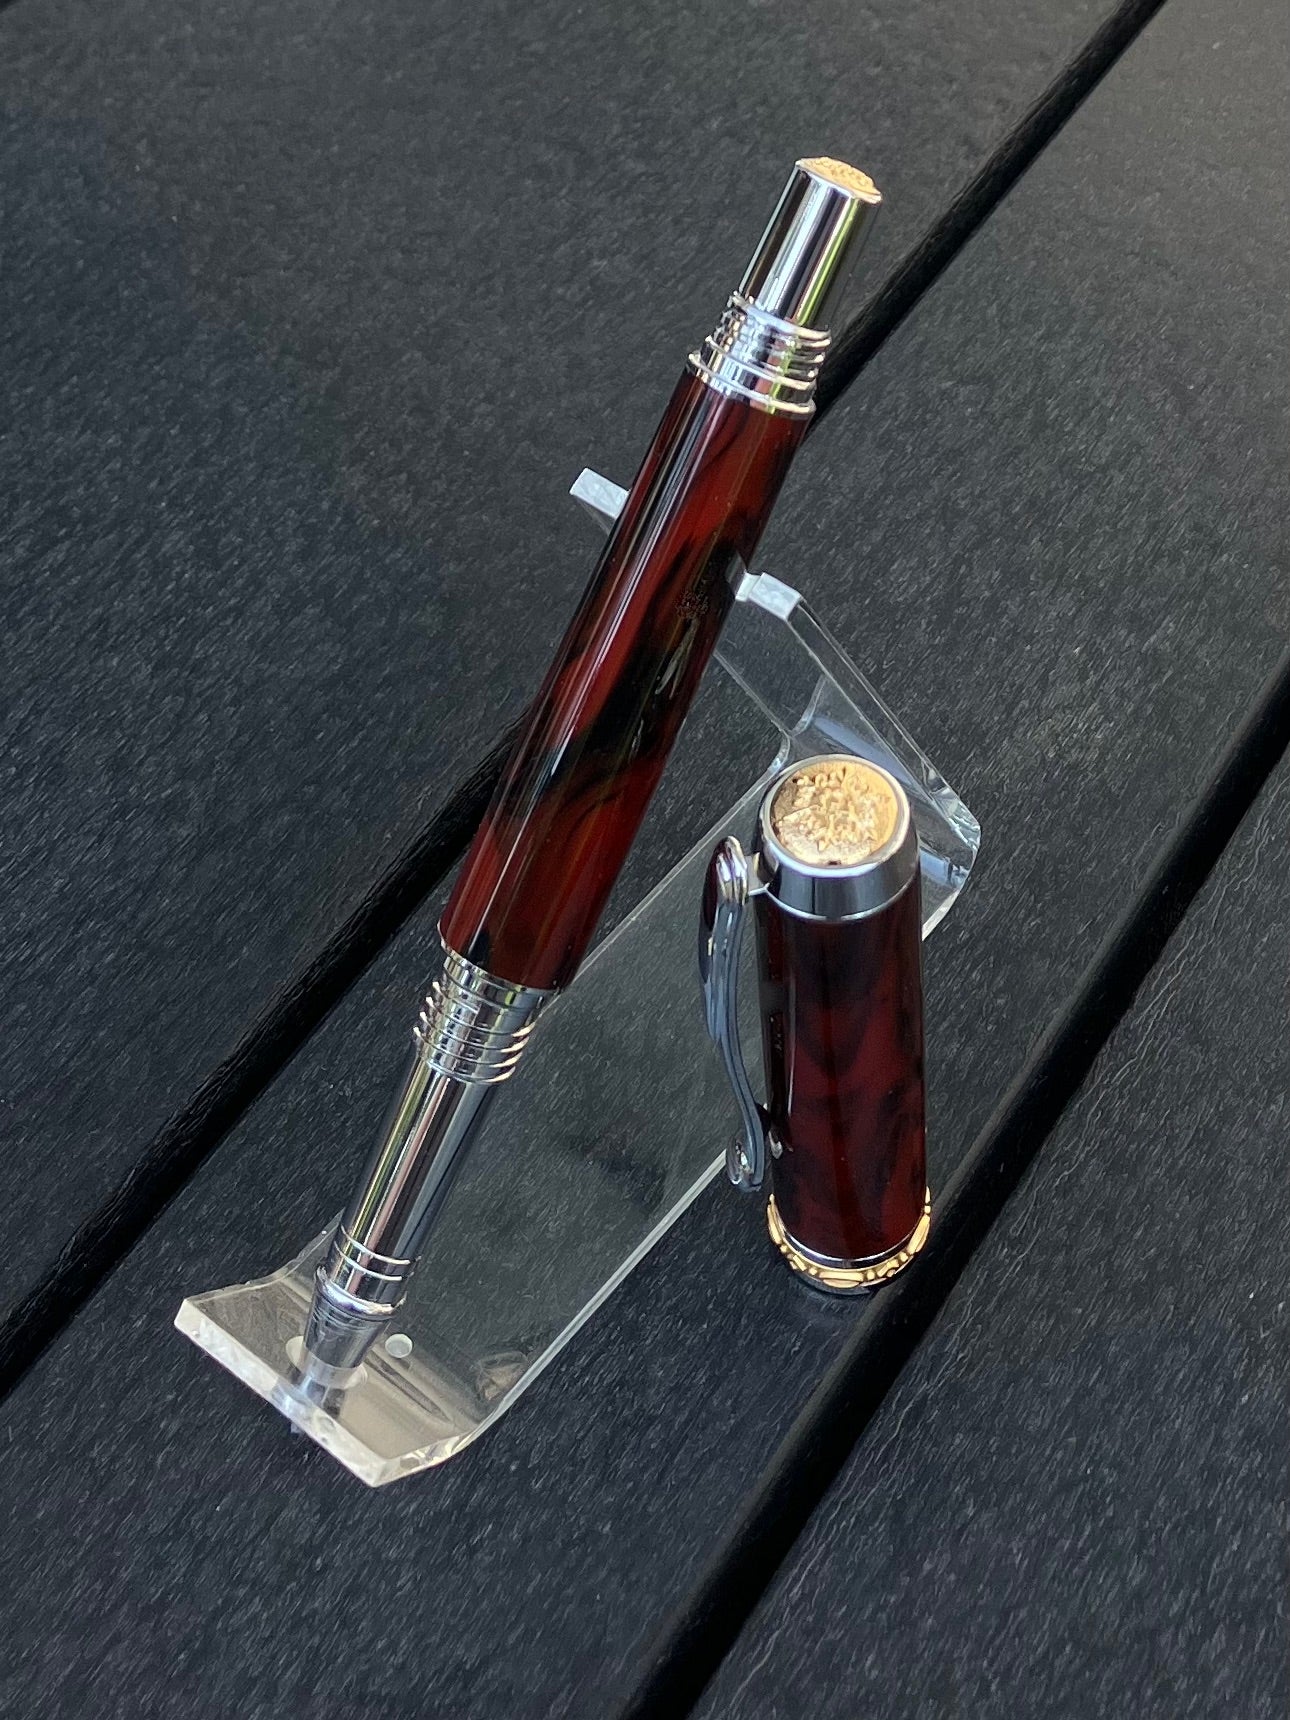 Mahogany Obsidian - Handcrafted Rollerball Pen.  This stunning pen is made with TruStone, a combination of real stone powder and acrylic resin, and features Rhodium with Gold accents for a luxurious look.